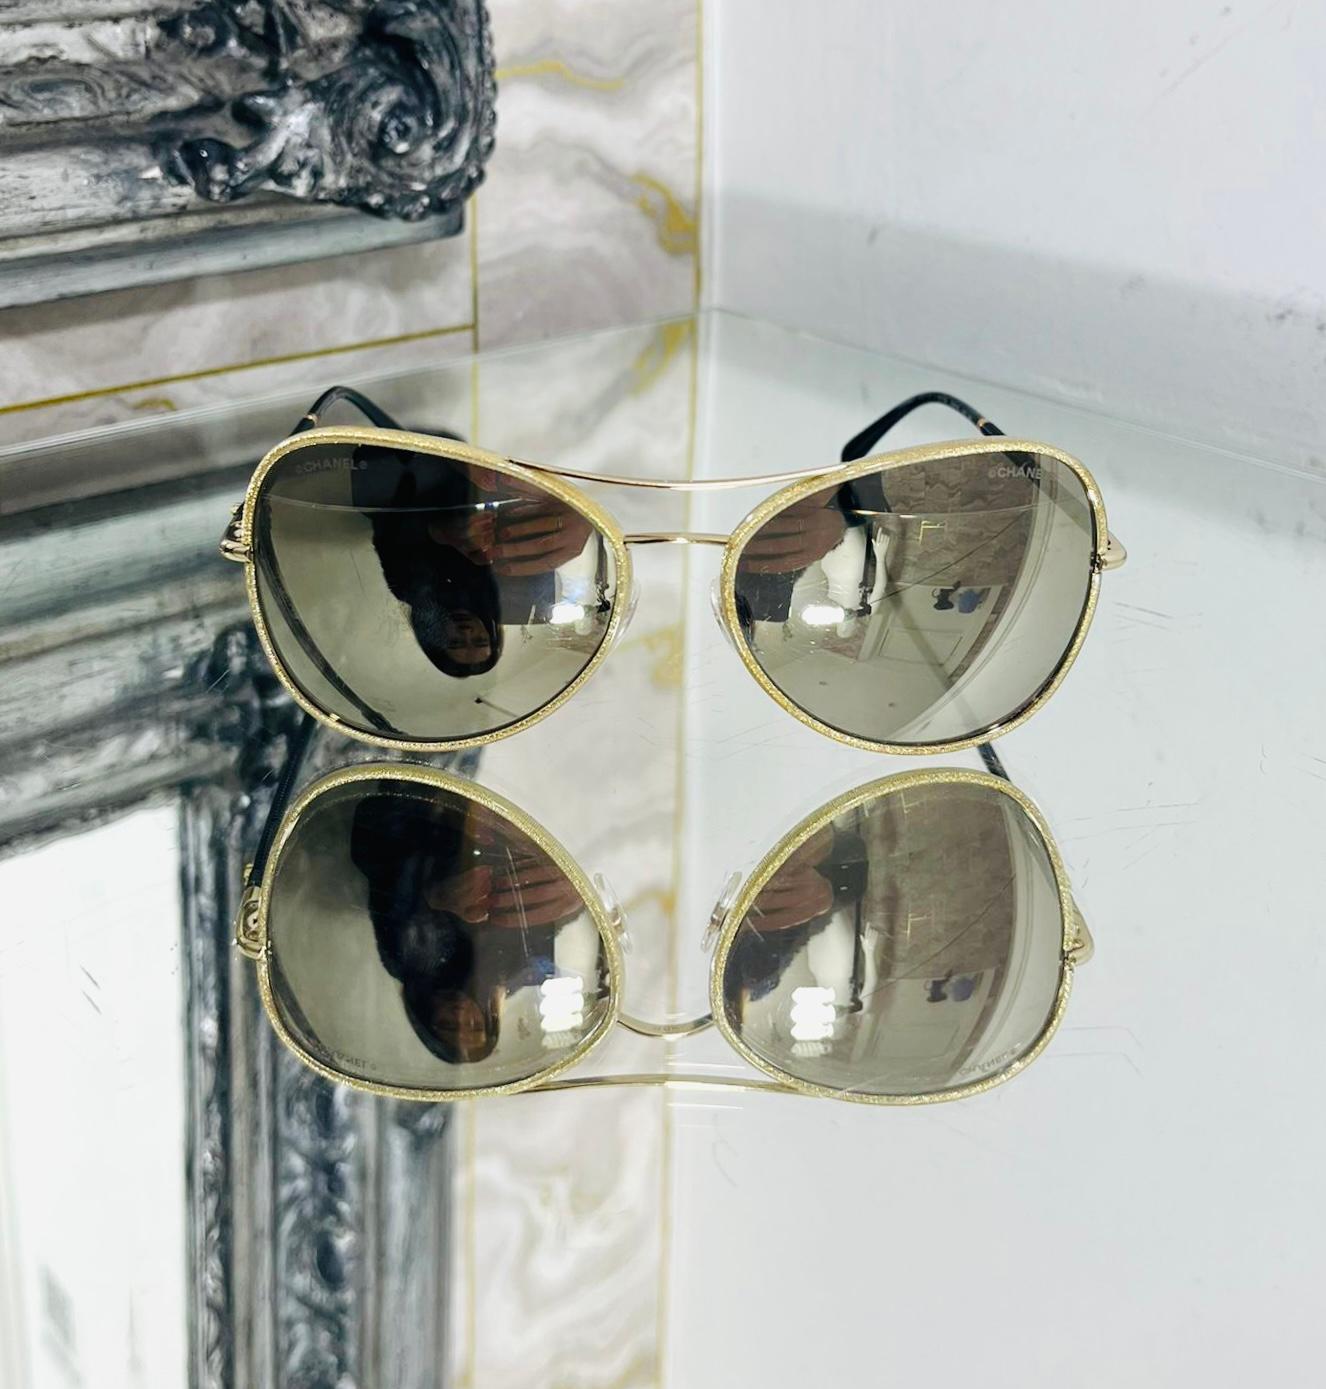 Chanel Mirrored Pilot Sunglasses

Aviator sunglasses designed with sparkling gold, textured frames.

Styled with brown, mirrored lenses and black arms.

Featuring gold 'CC' logo detailing to the side.

Size – One Size 

Condition – Good (Light